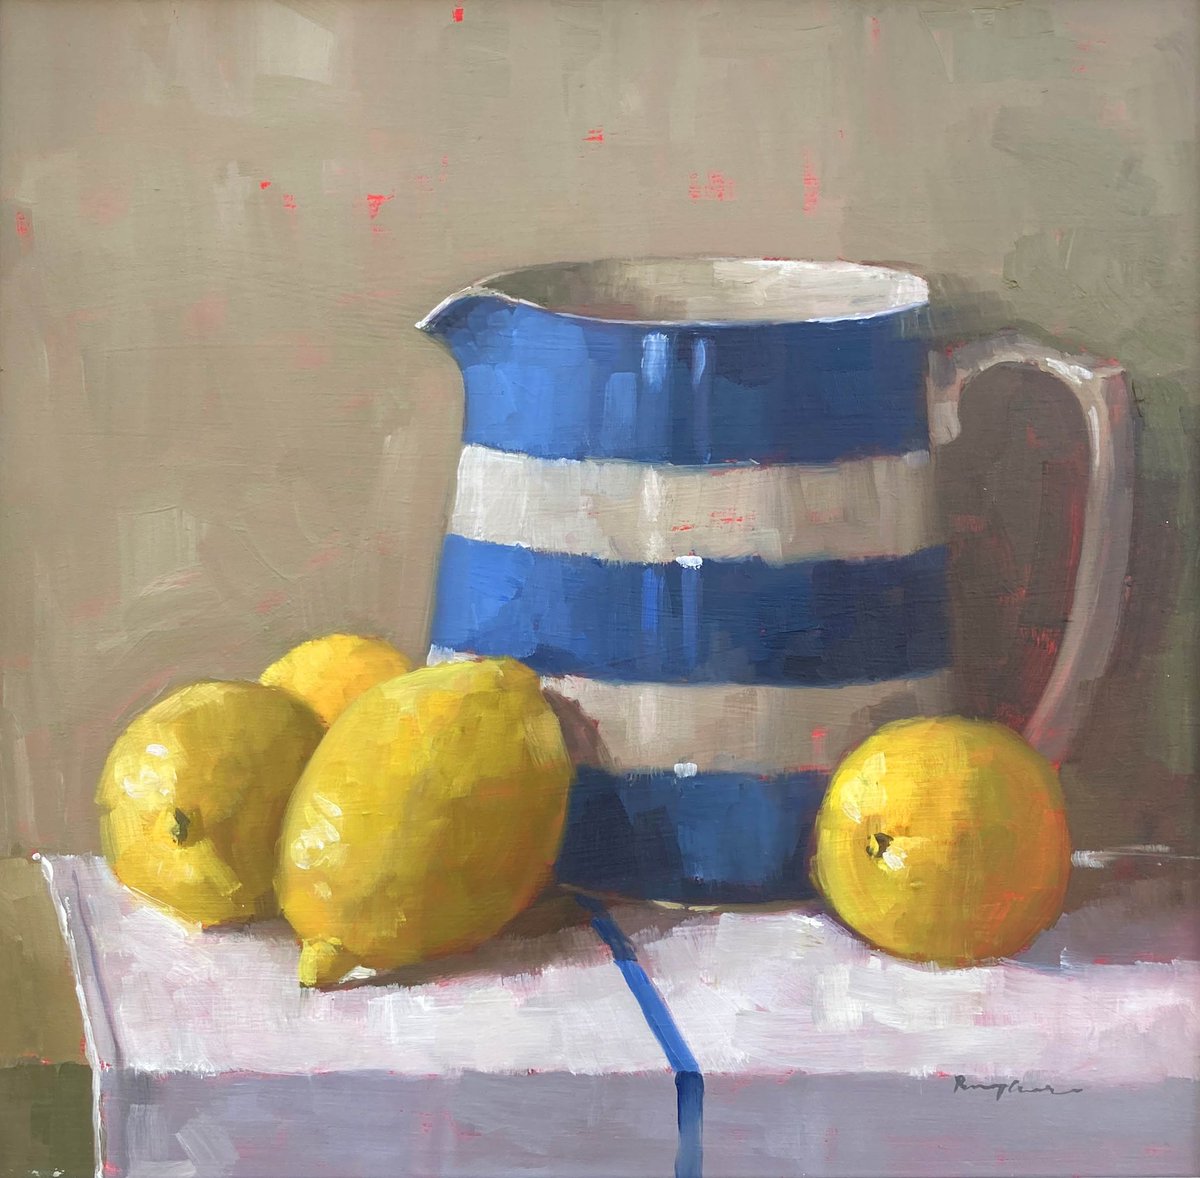 She’s gone and done it again. This superb Penny German still life has found a new, loving home. More here tho:
theharbourgallery.co.uk/penny-german 

#pennygerman #stilllife #stilllifepainting #cornishware #lemons #oilpainting #contemporarybritishpainter #contemporarystilllife 

@GermanPenny